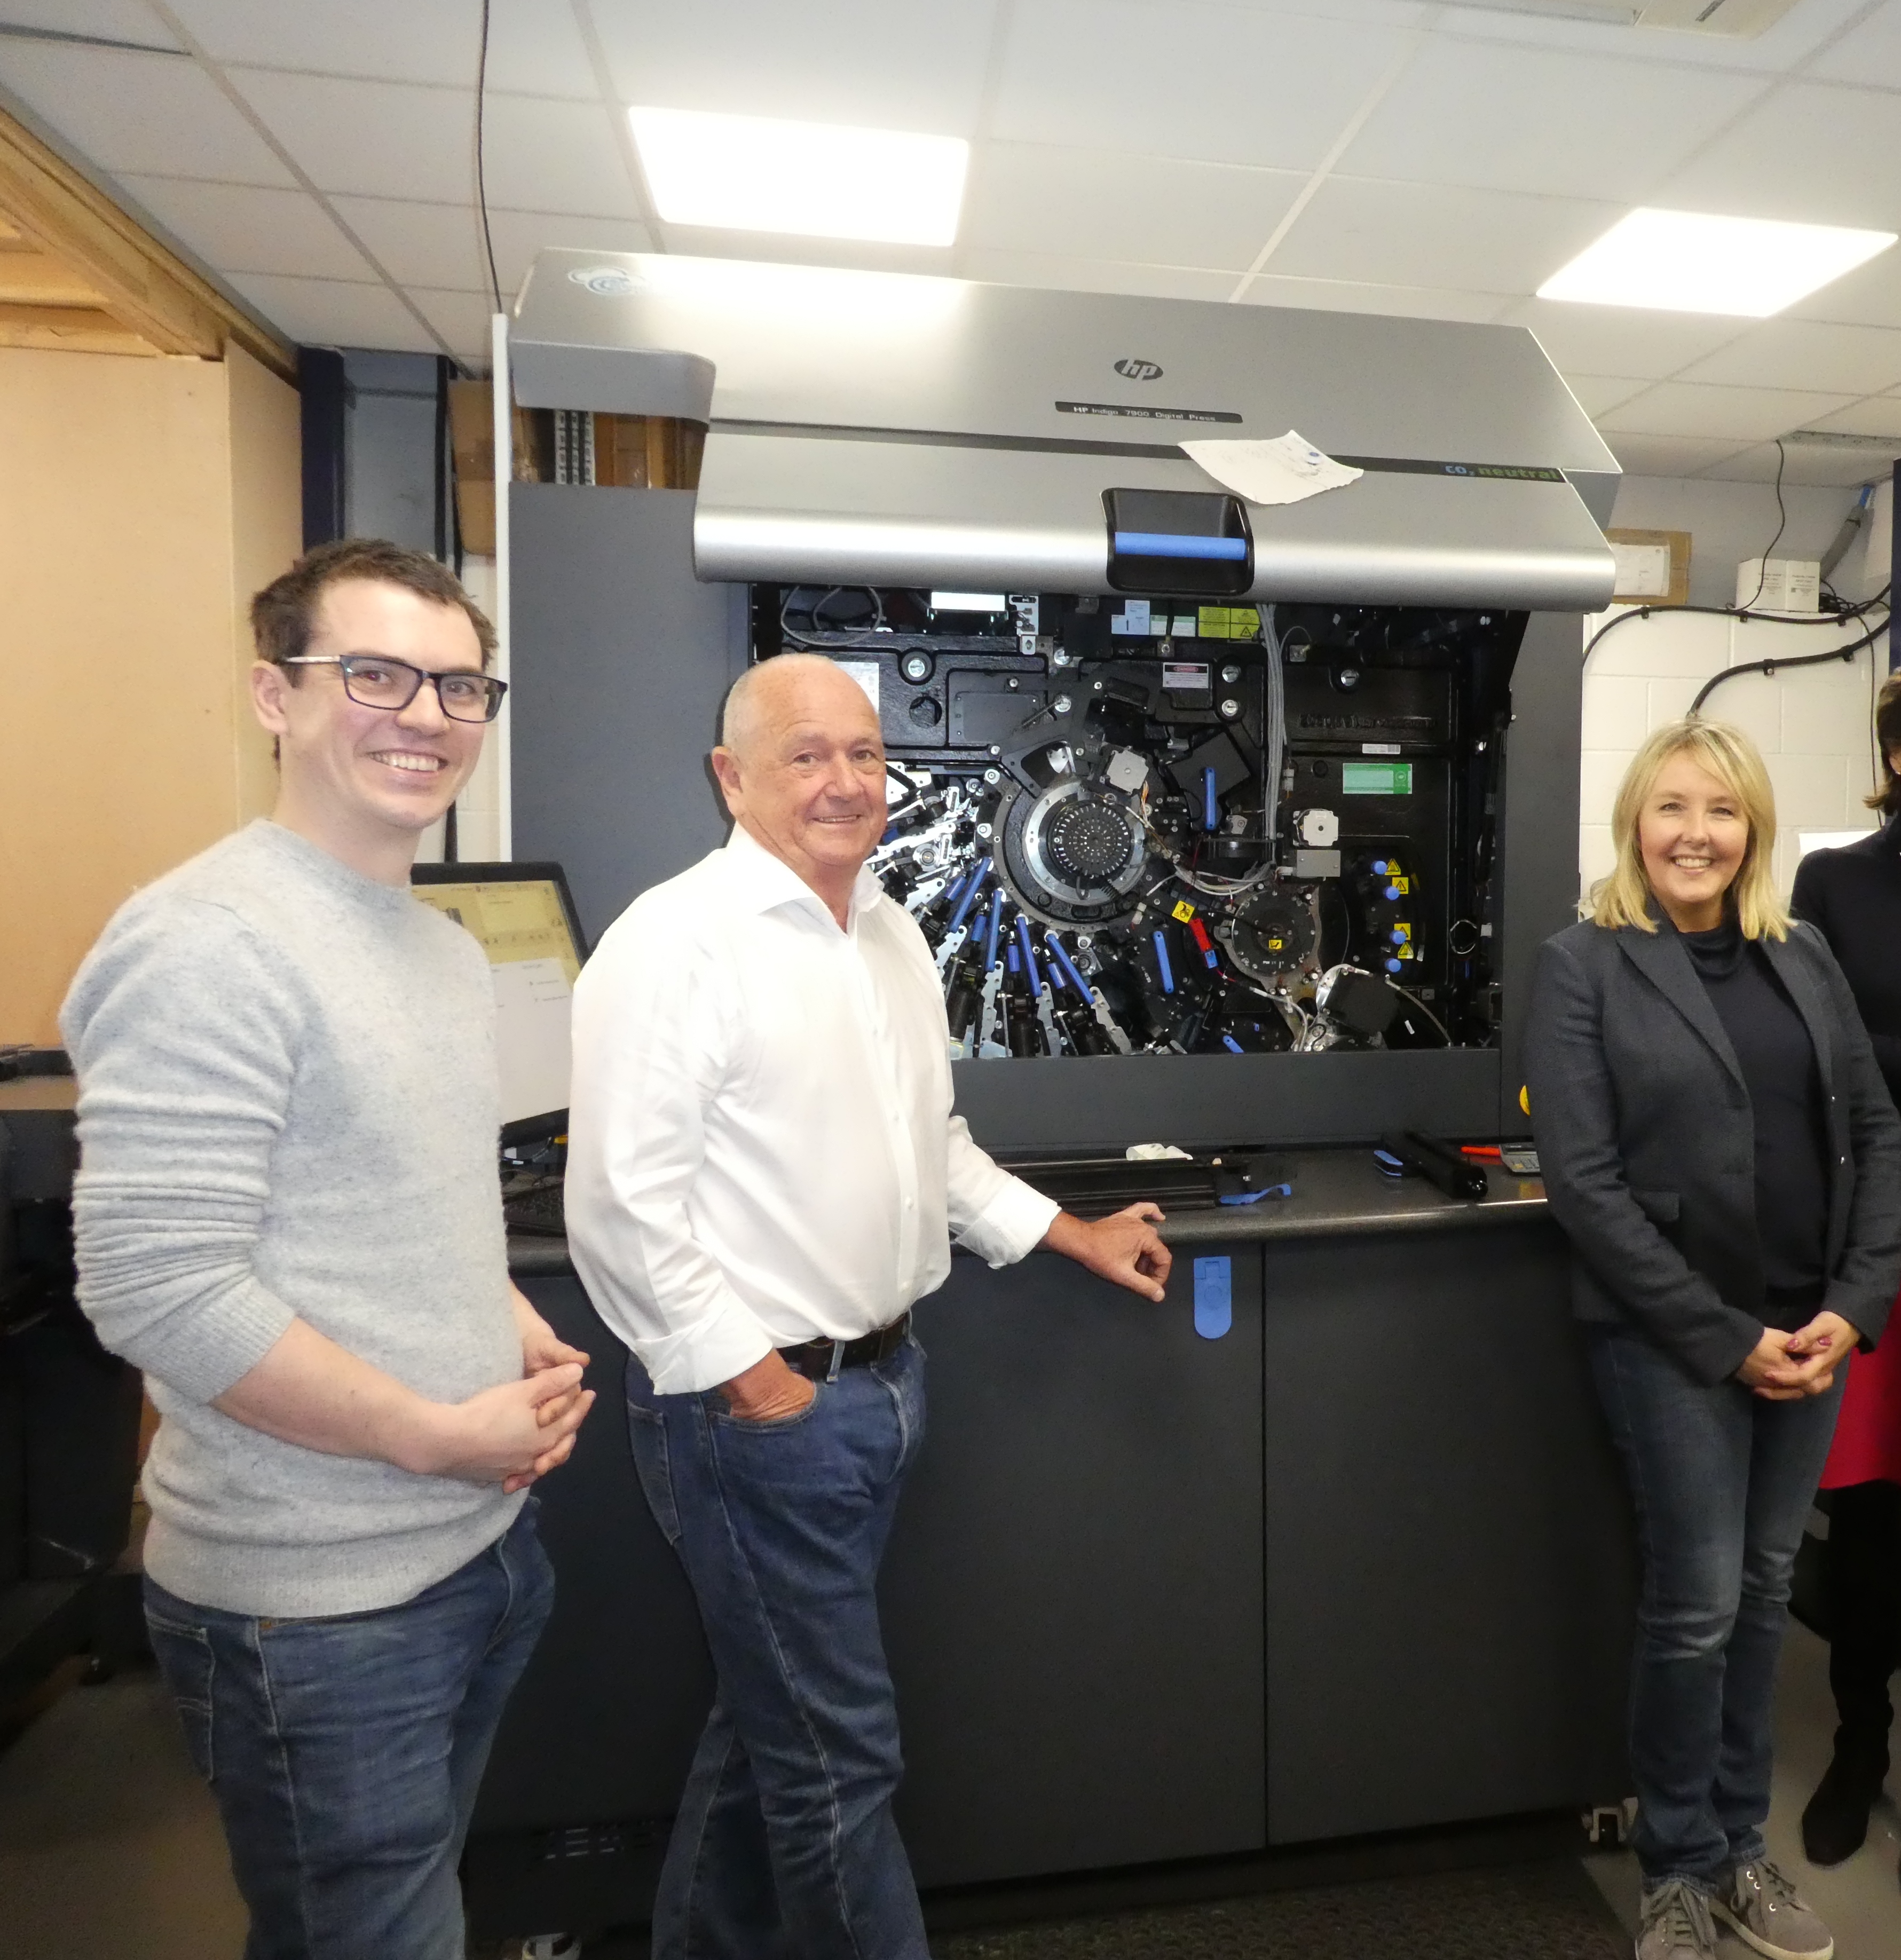 Above: The Simplicity system has been developed and is run from The Imaging Centre’s HQ in Kent. (Left-right) Adam Short, Bob Short and Julie Brightly of The Imaging Centre. 